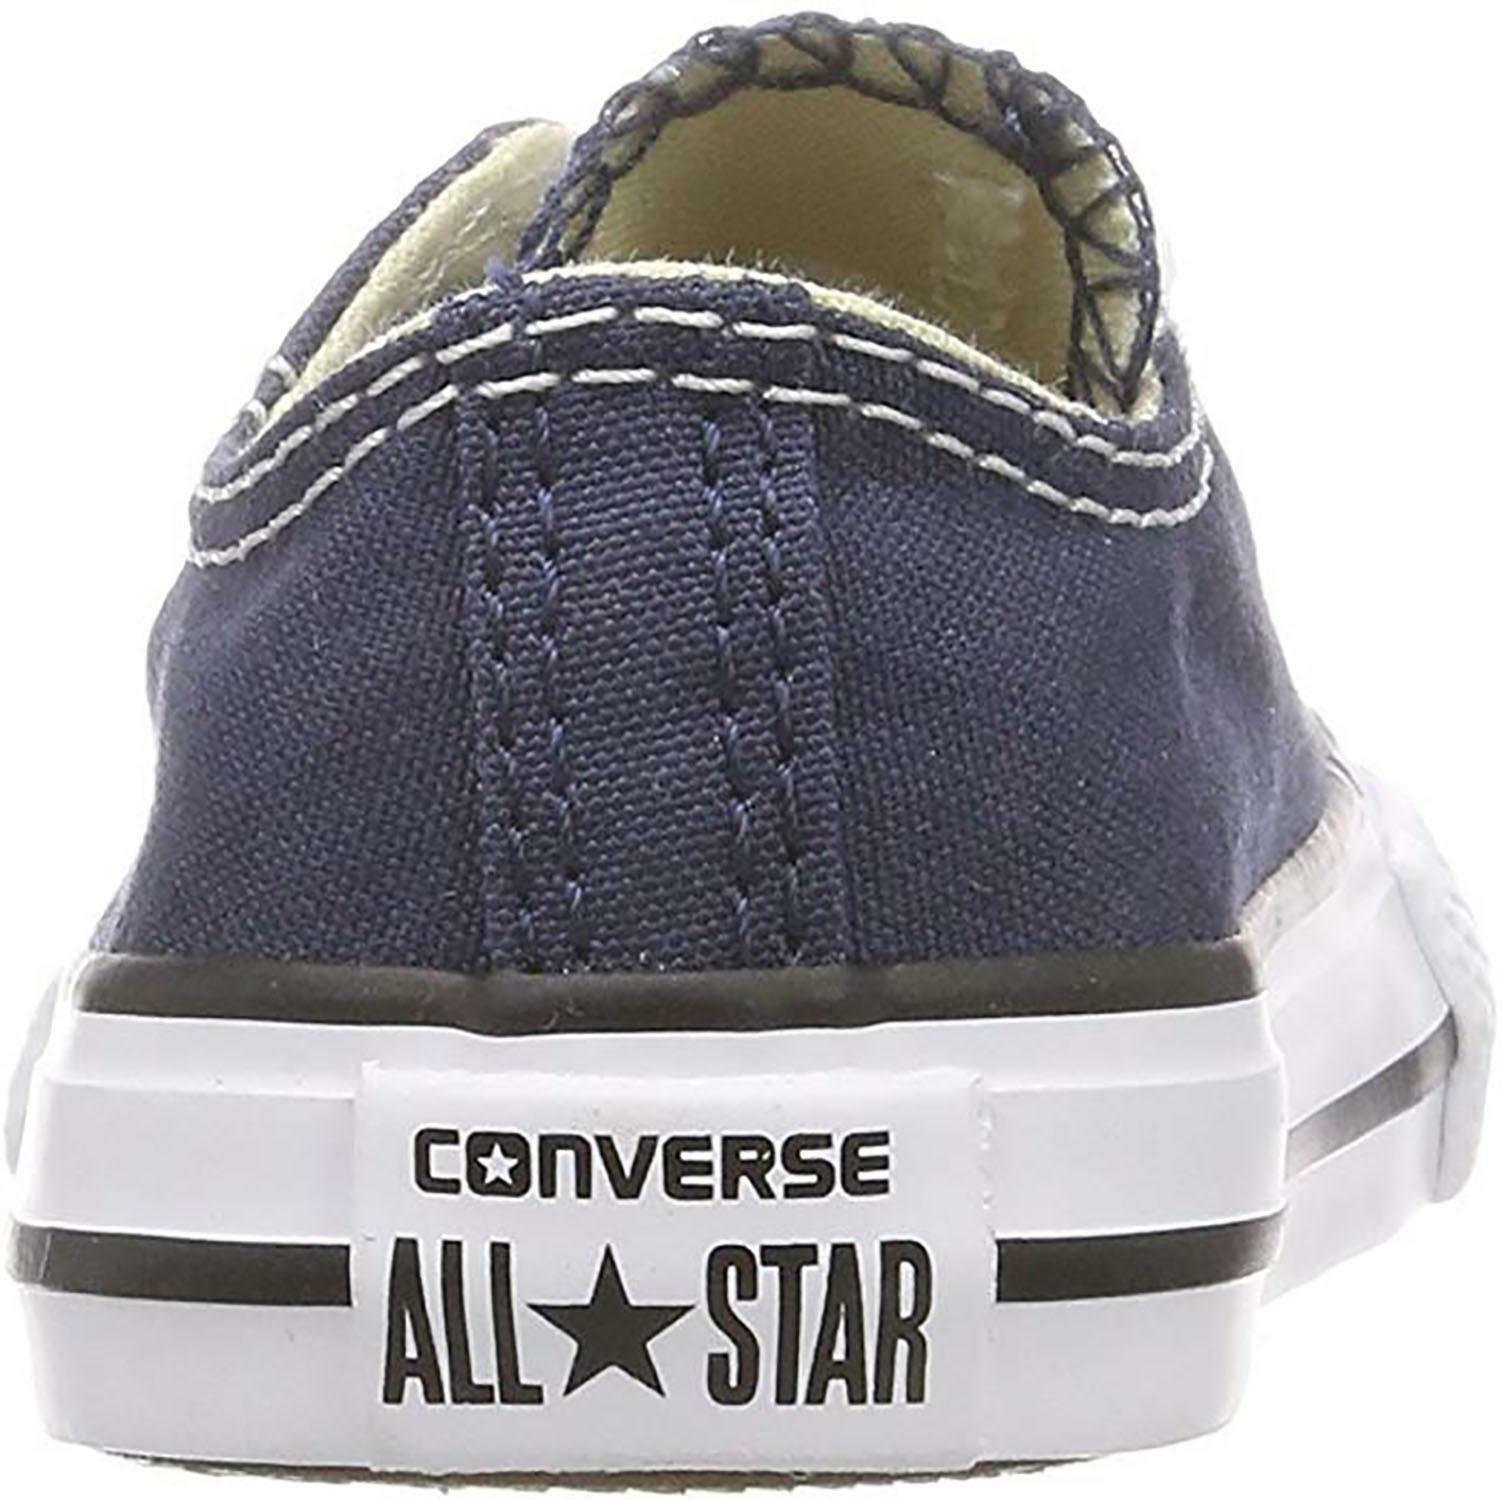 converse converse all star ct junior sneakers blue navy 3j237